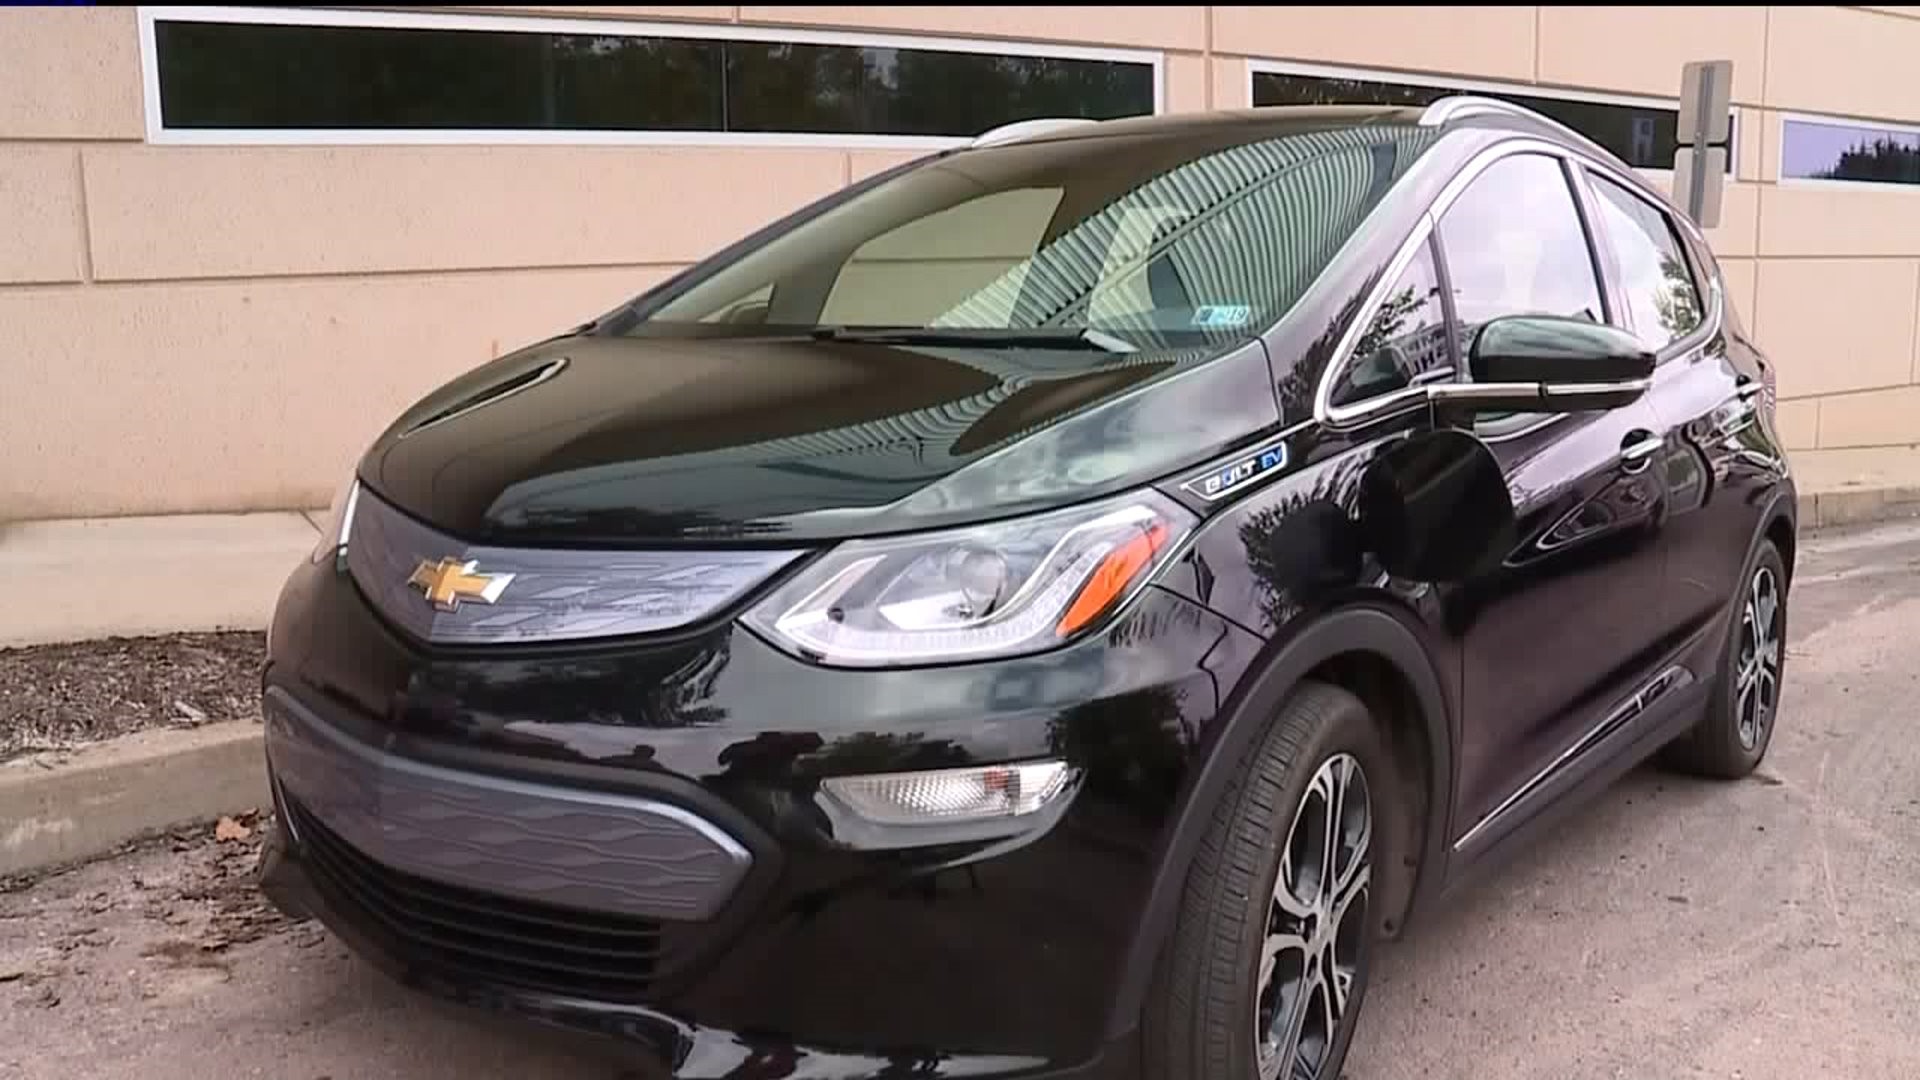 Geisinger Employees Try Out Electric Vehicles